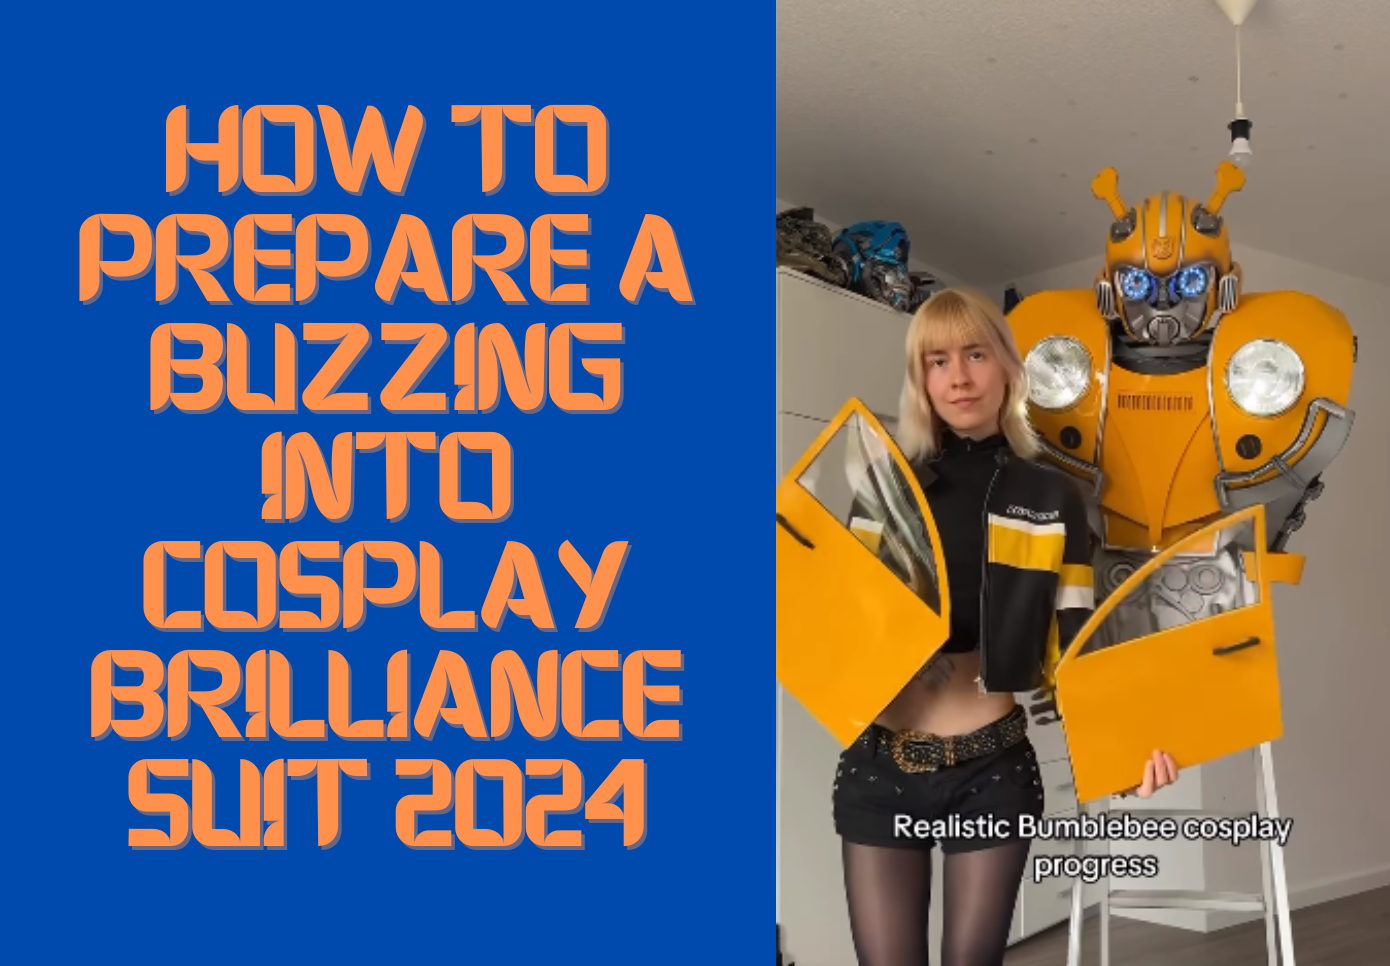 How to Prepare a Buzzing into Cosplay Brilliance Suit 2024